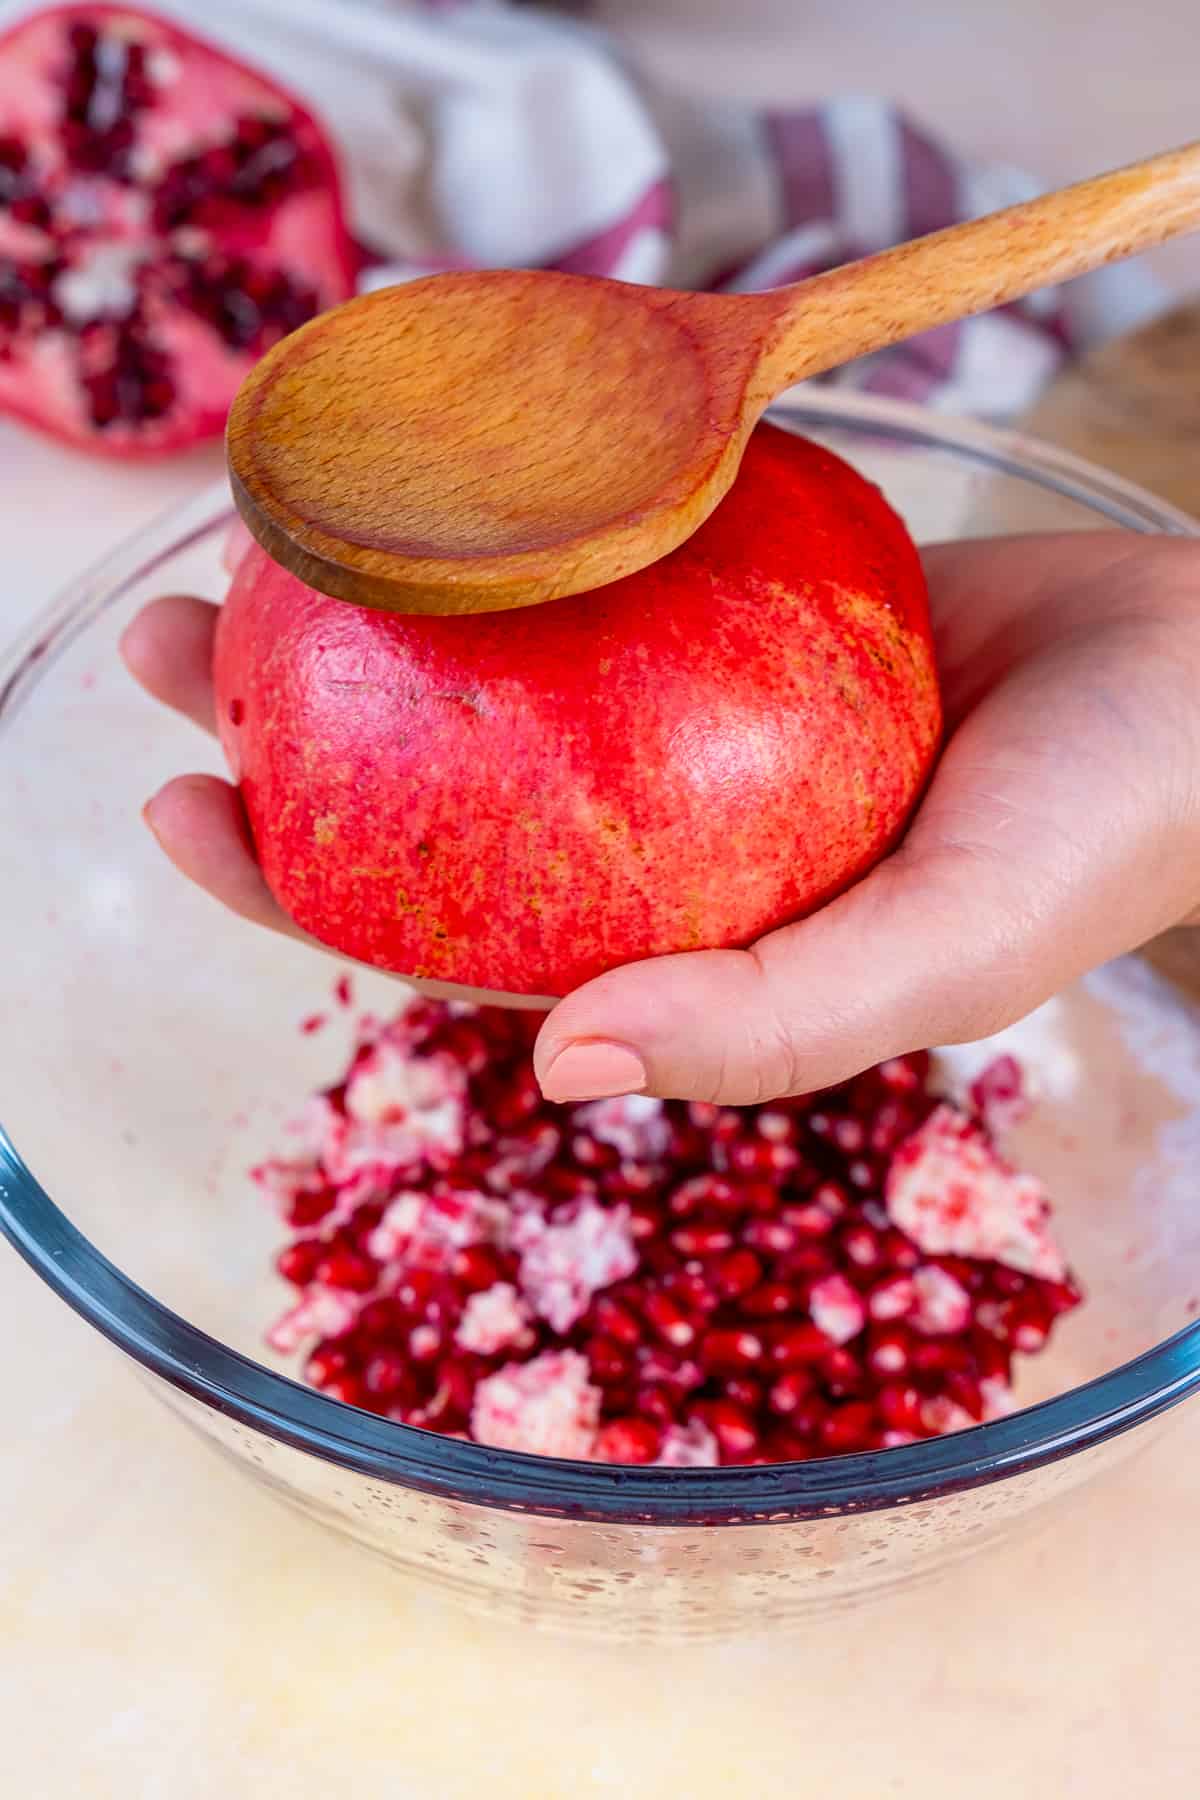 Hands smacking a half pomegranate with a wooden spoon over a mixing bowl.